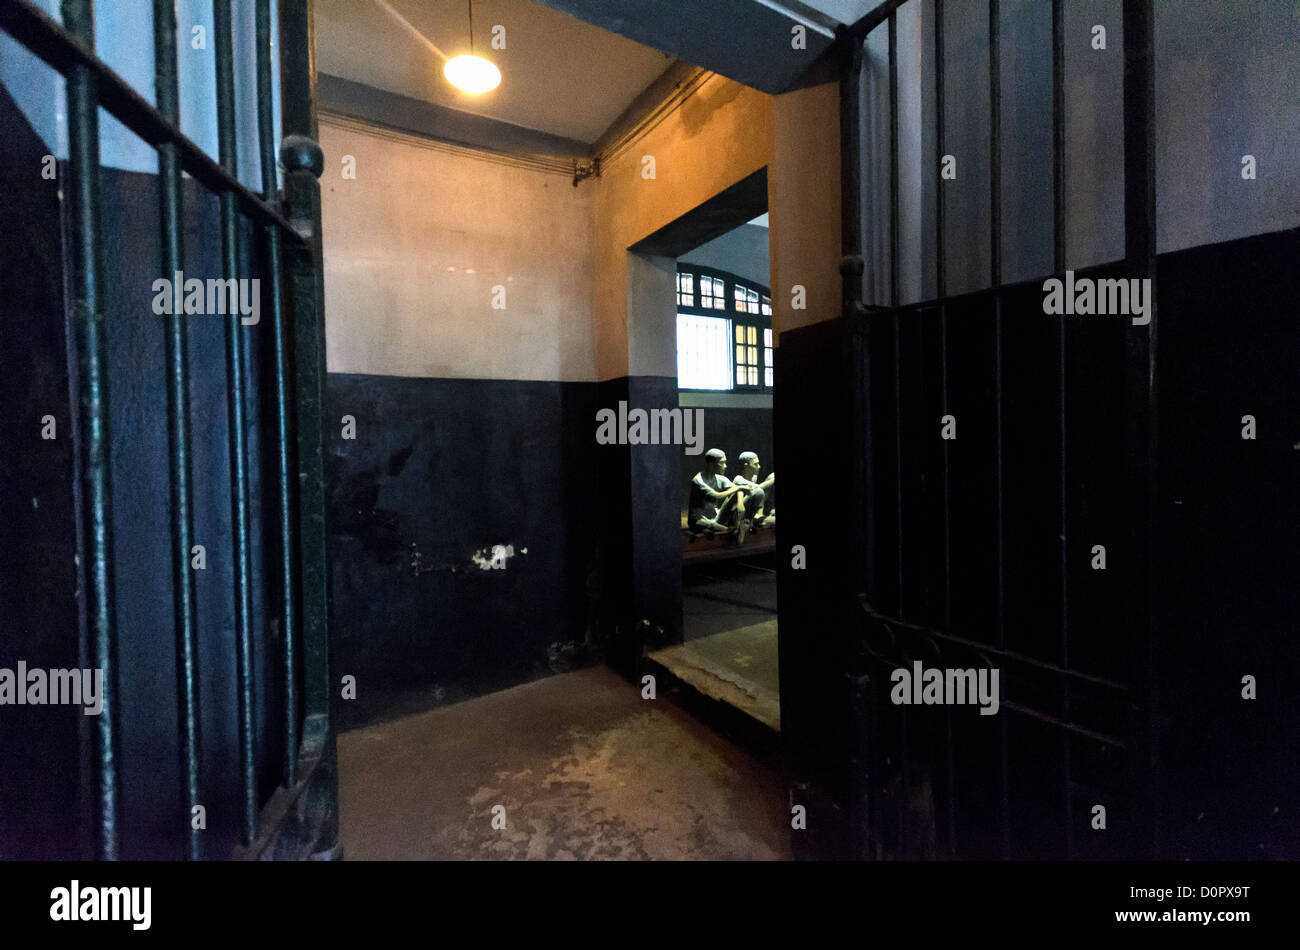 HANOI, Vietnam - A view through a corridor in Hoa Lo Prison. Through the iron gates can be seen plastic dummies illustrating the conditions that prisoners were kept in by the French colonial government. The prison is better known in the West as the Hanoi Hilton, the place that American pilots were kept as POWs during the Vietnam War. Stock Photo